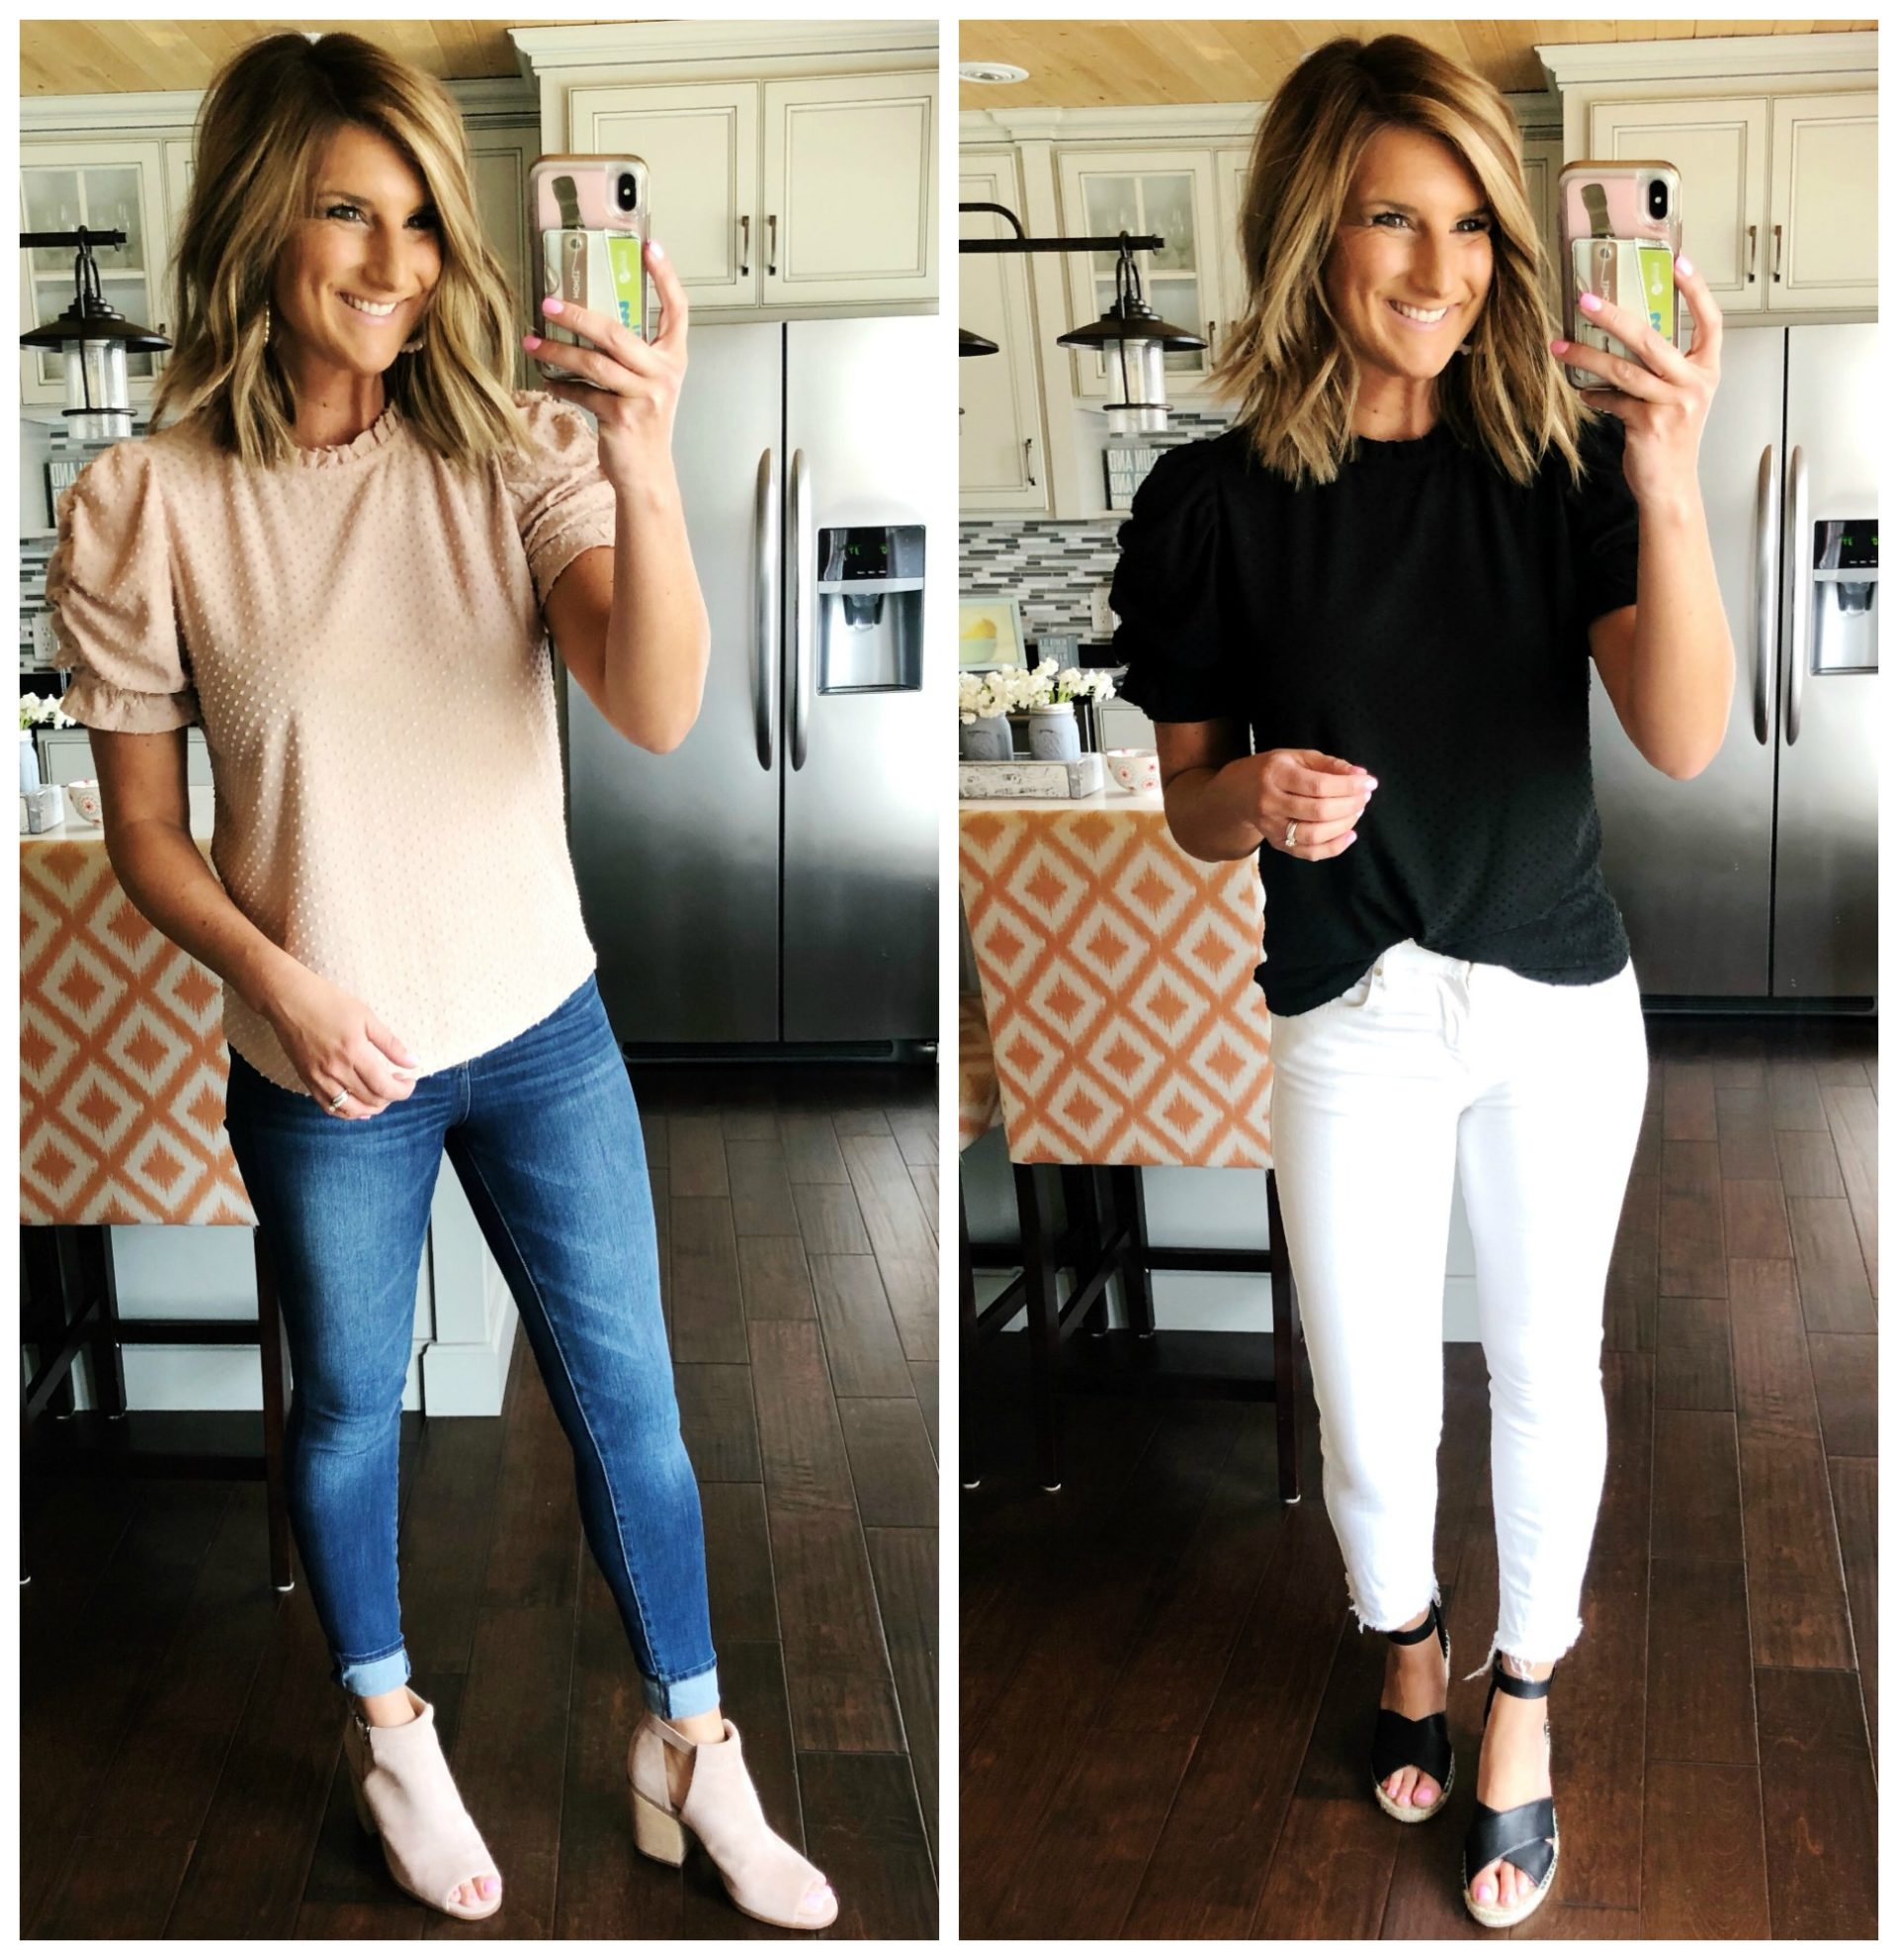 Feminine Top for Work // Work Wear // Spring Work Outfit // White Jeans // Best White Jeans